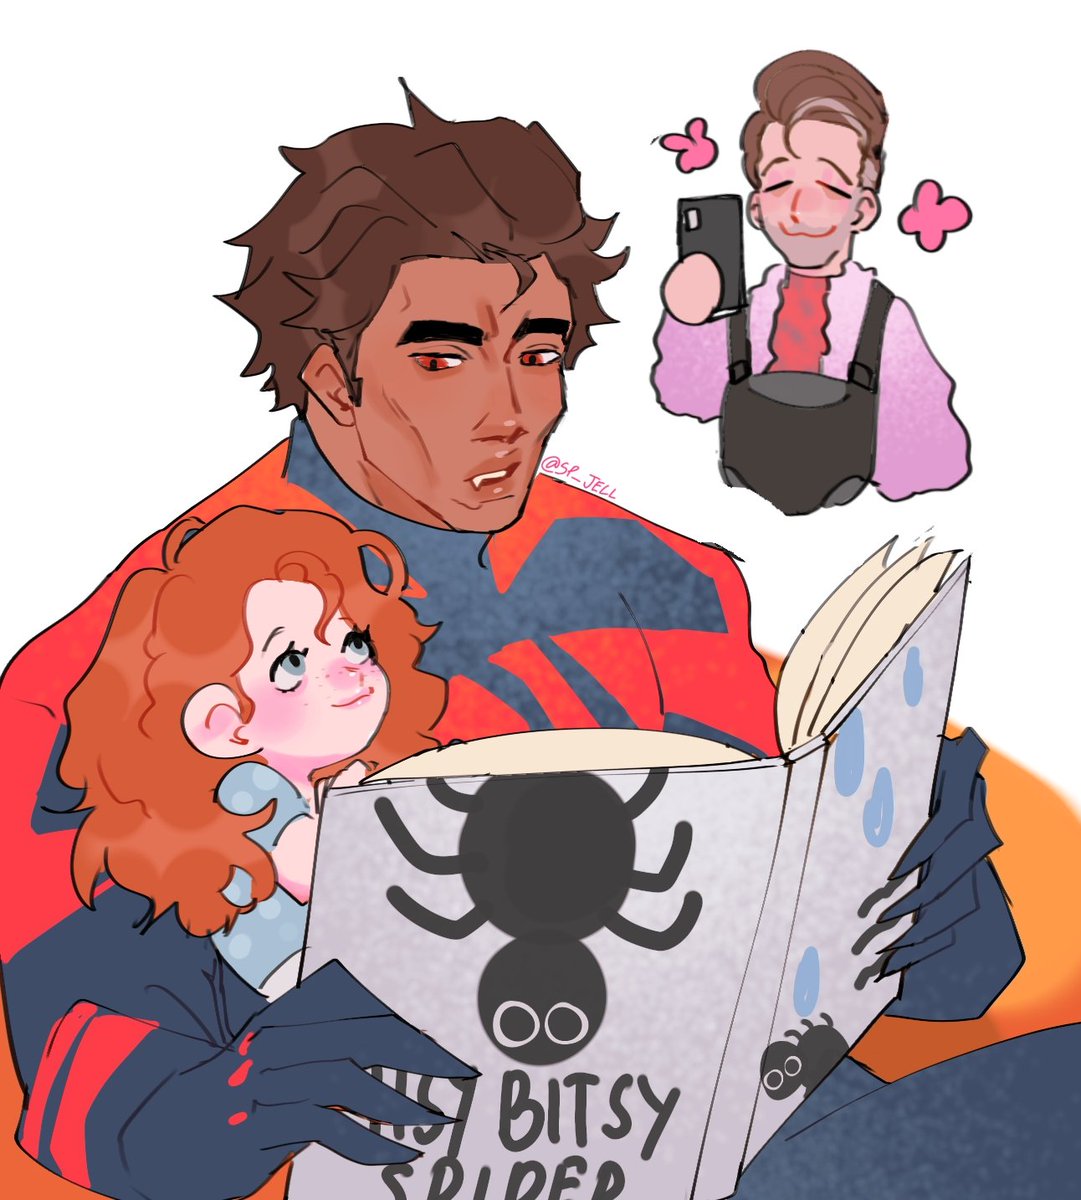 Uncle miguel give mayday bedtime story 🥺

#SpiderManAcrossTheSpiderVerse #SpiderMan #SpiderVerse #spiderdads #SpiderMan2099 #PeterBParker #MIGUELOHARA